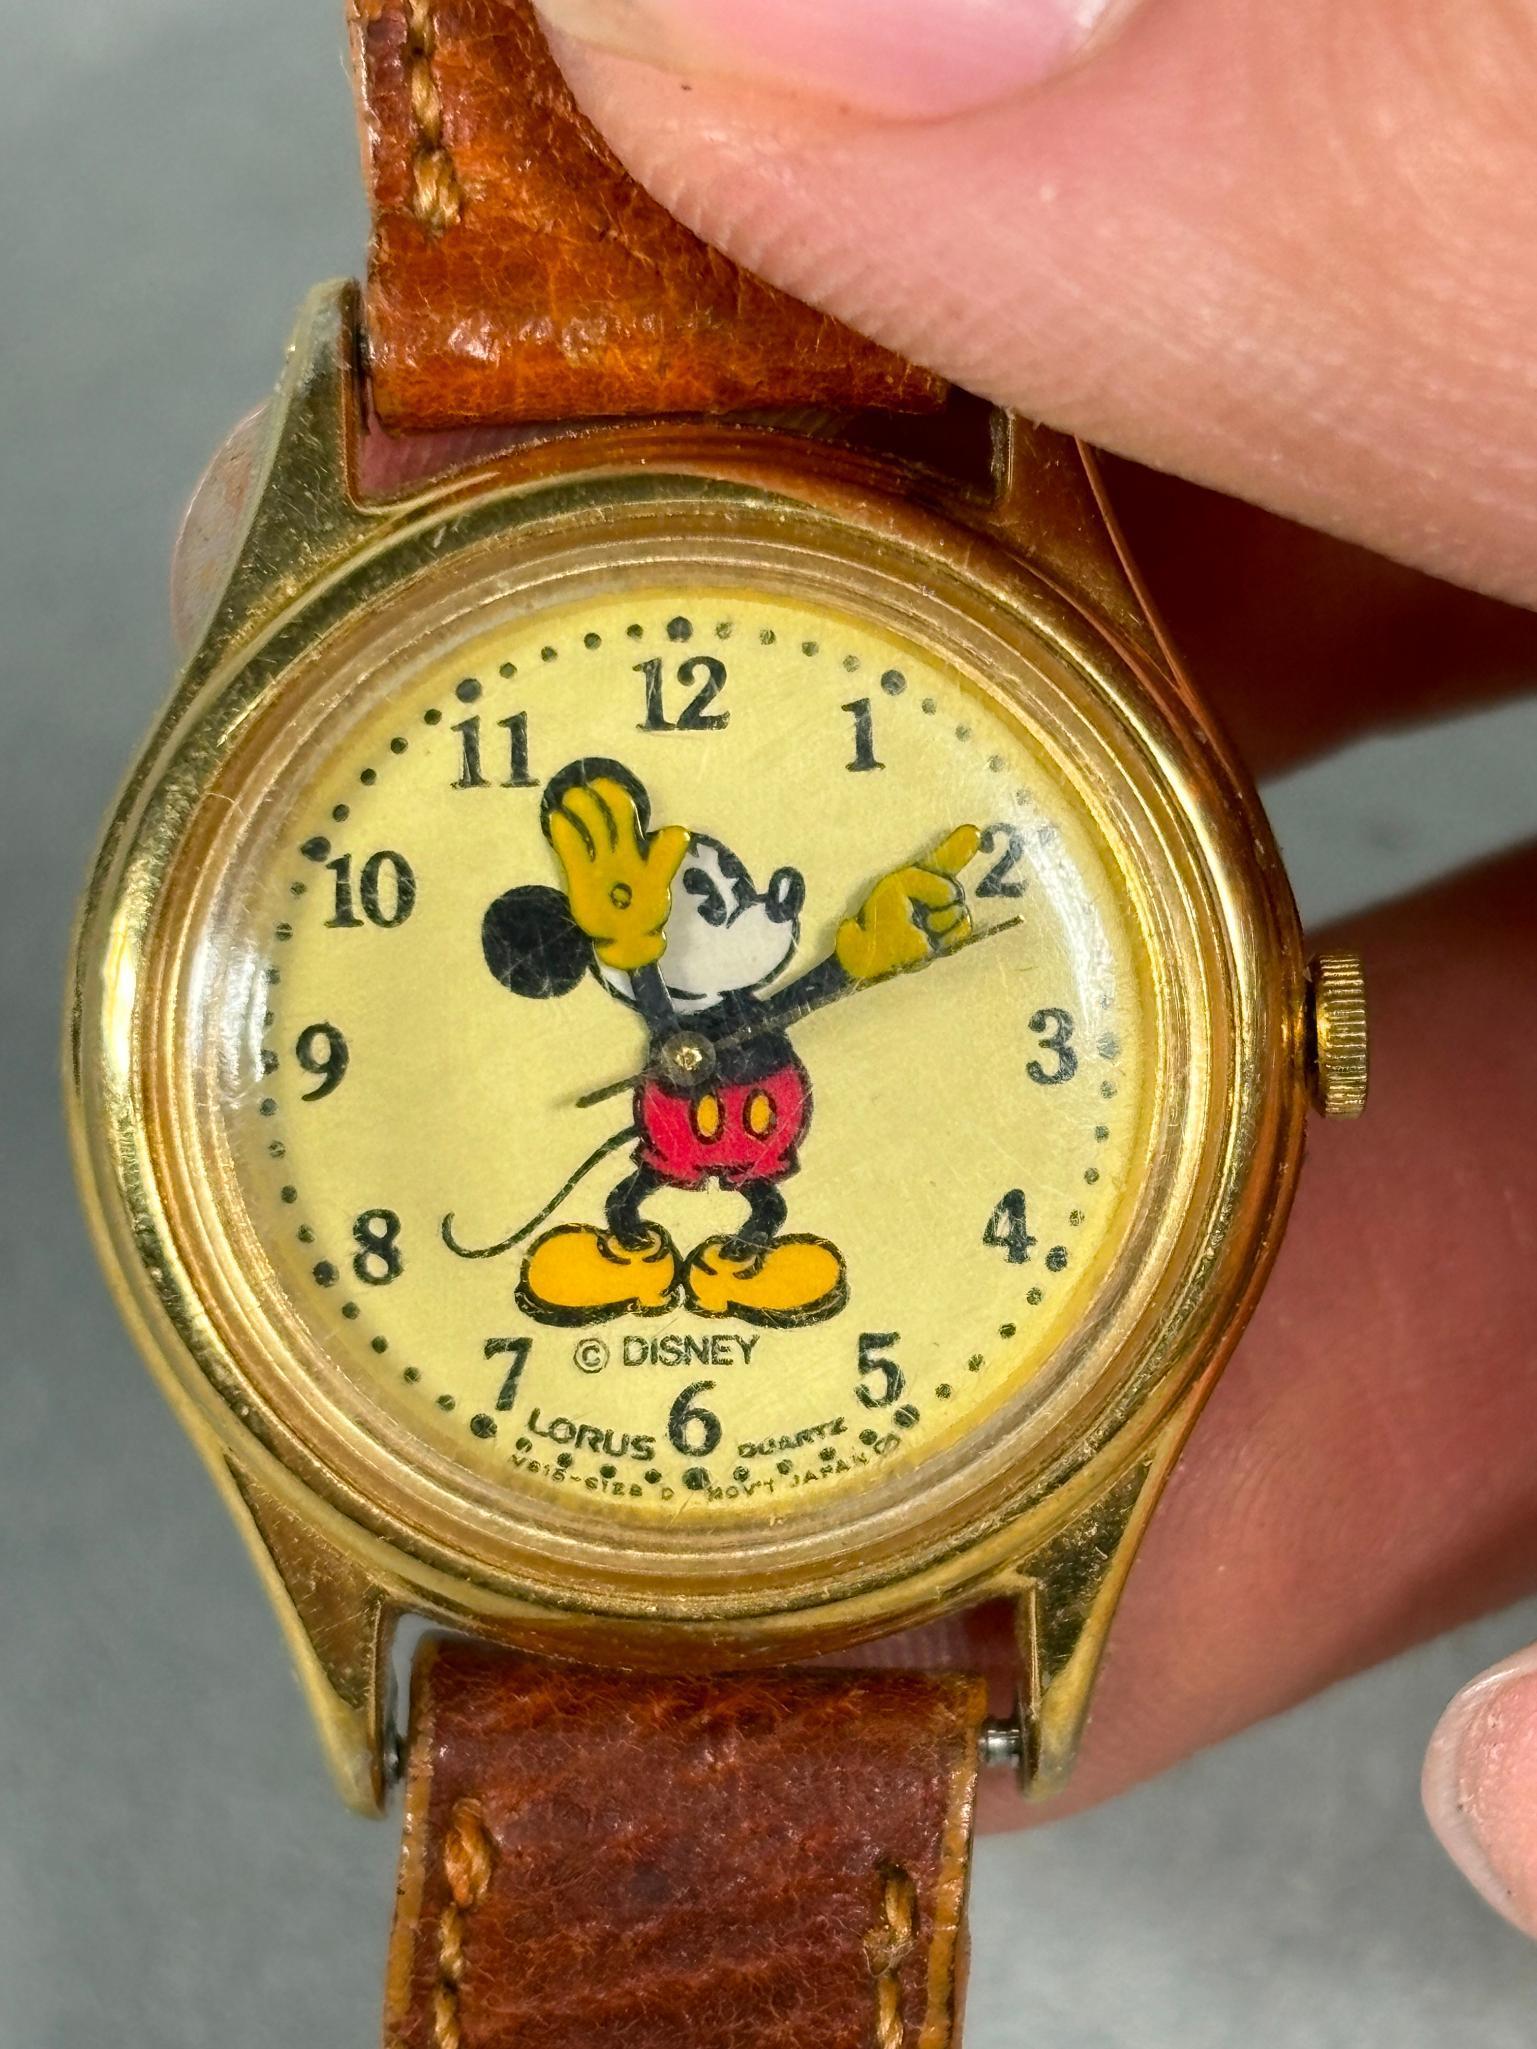 4 Vintage Watches including Mickey Mouse, Goofy, Cinderella, and Marvin The Martian